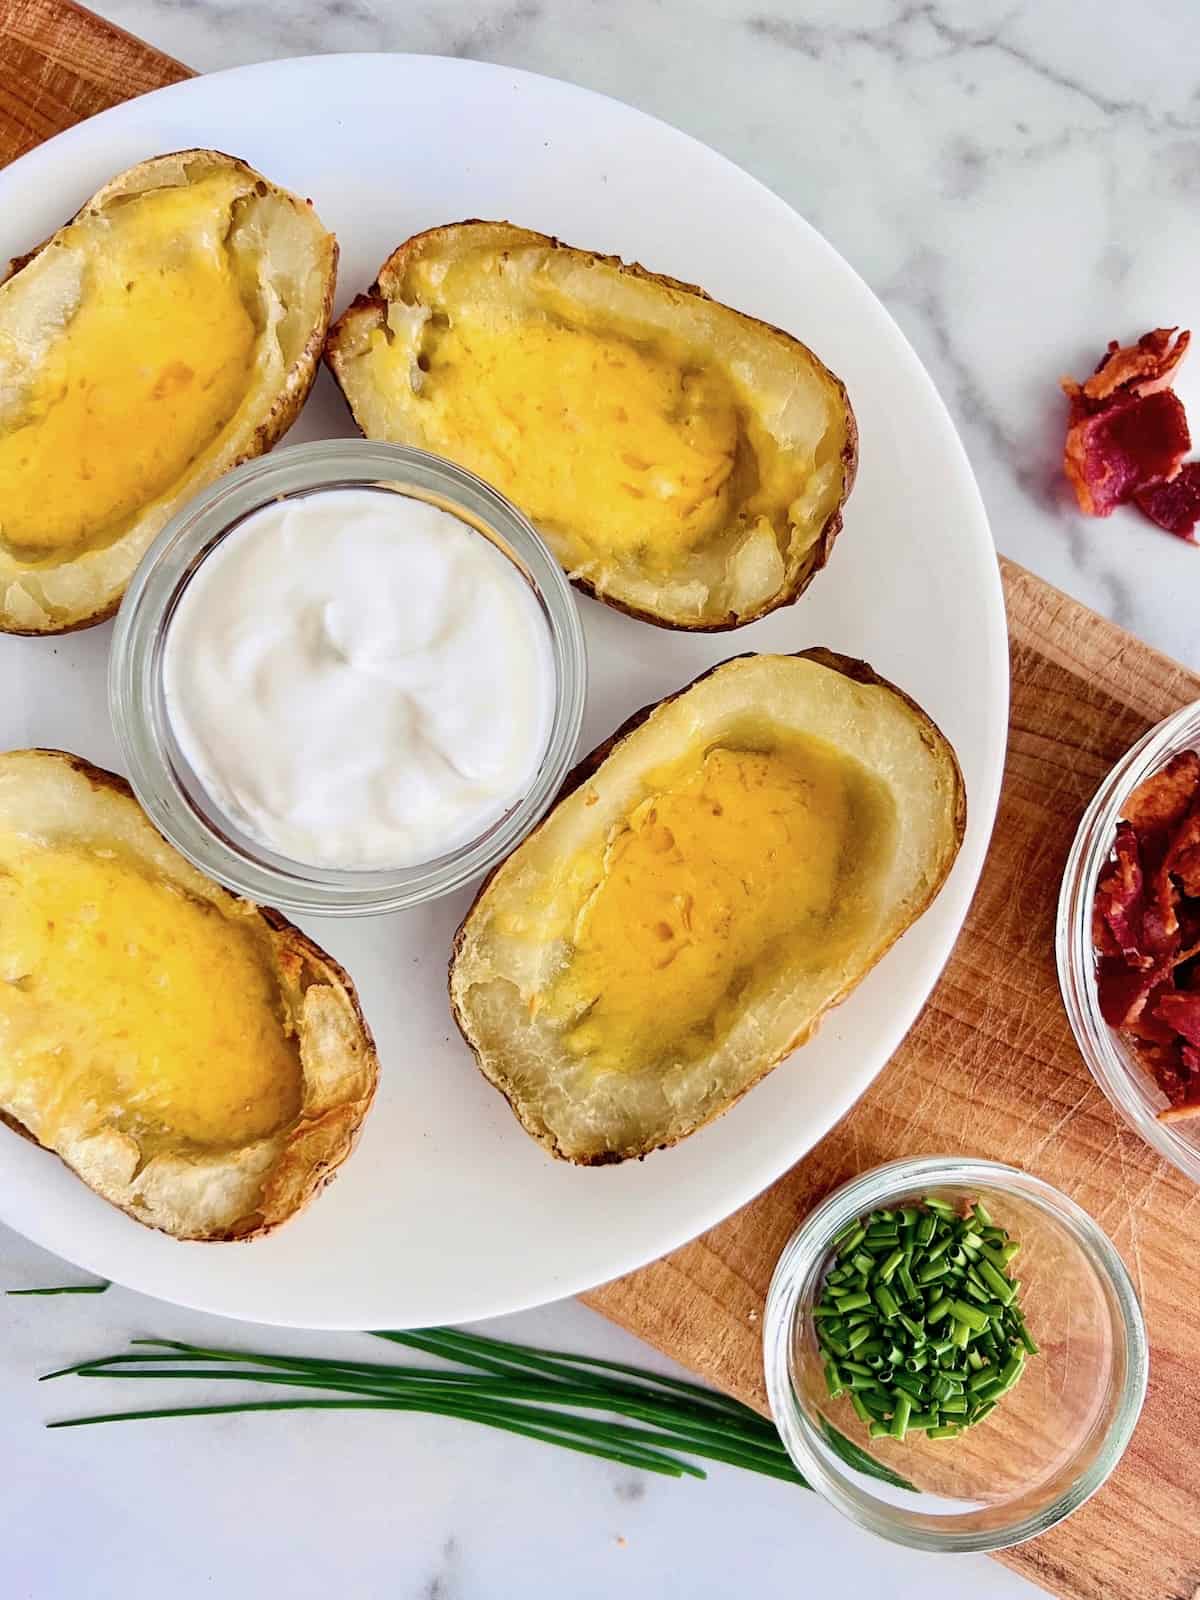 Crispy potato skins filled with melted cheddar next to bowls of toppings.